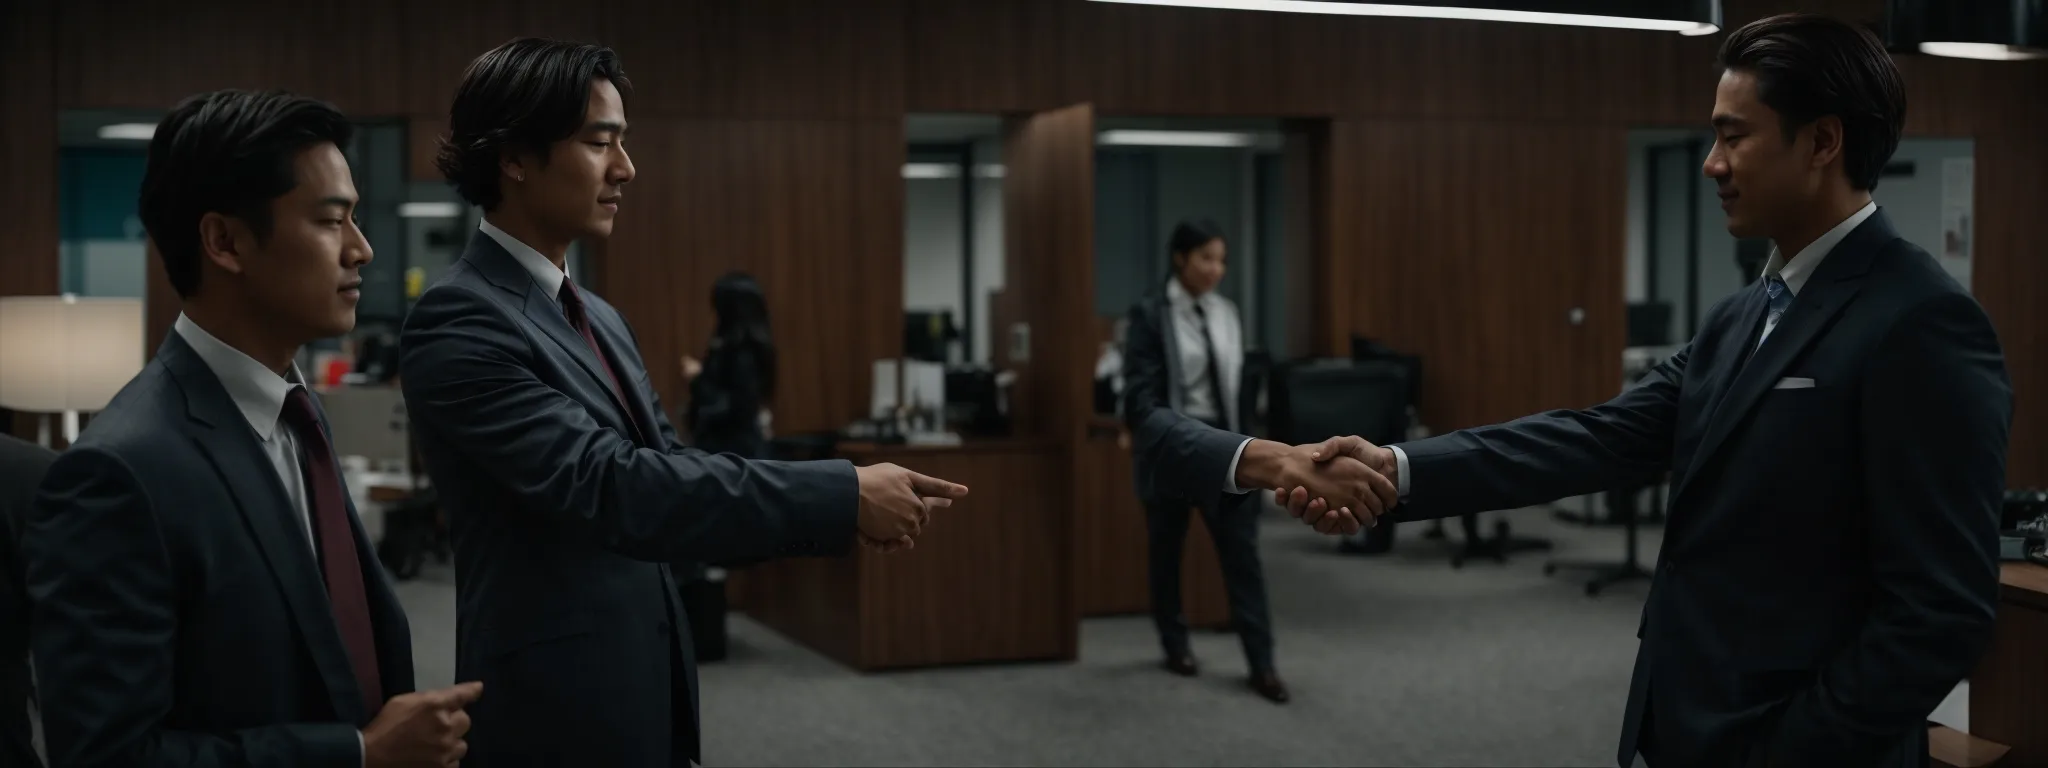 two individuals, engaged in a firm handshake against the backdrop of a bustling office space, symbolize a successful partnership.